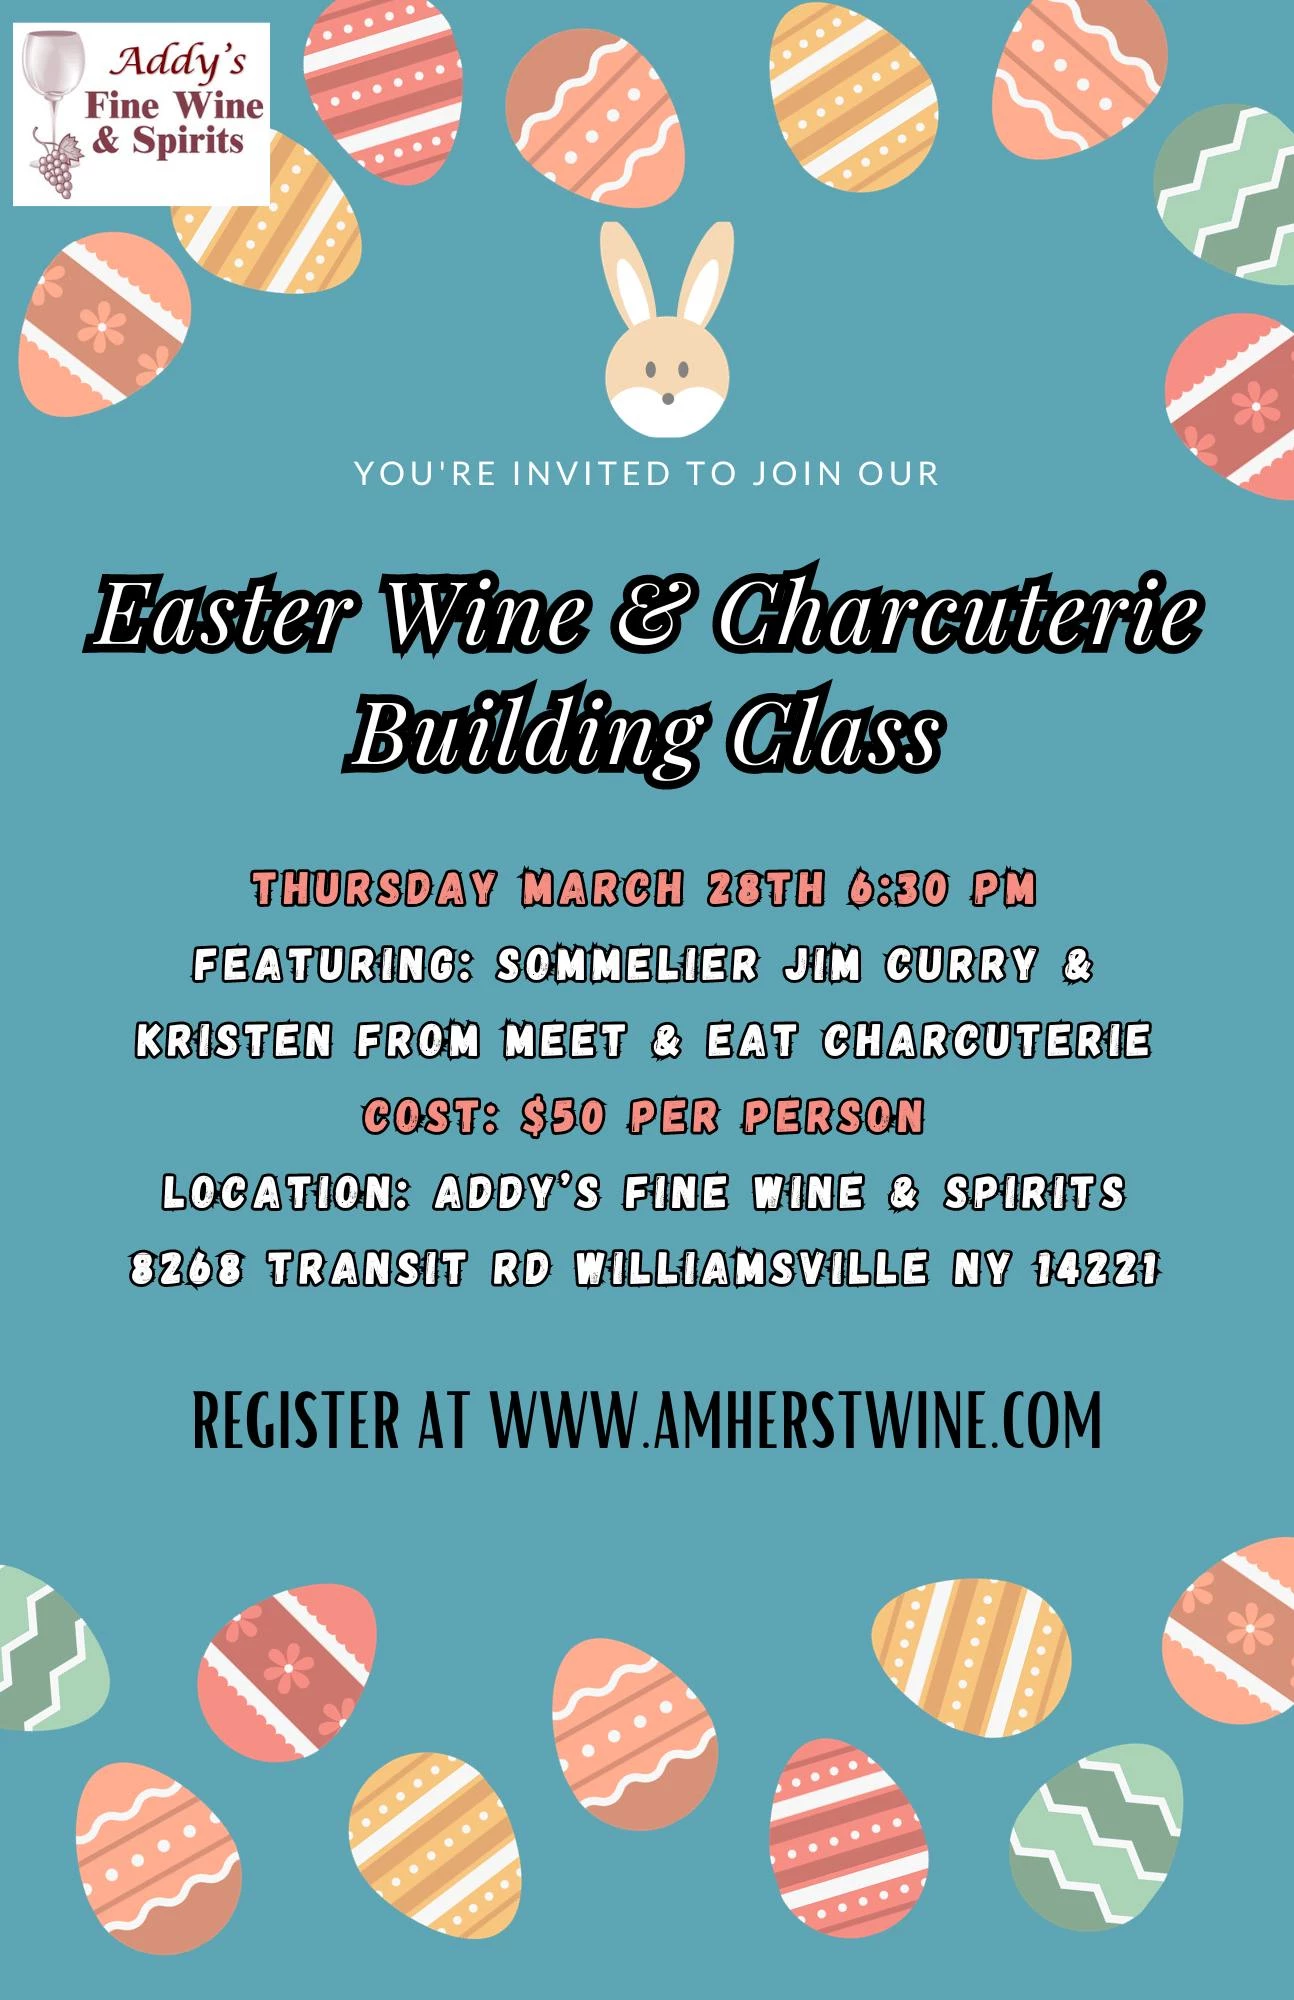 EASTER WINE & CHARCUTERIE BUILDING CLASS